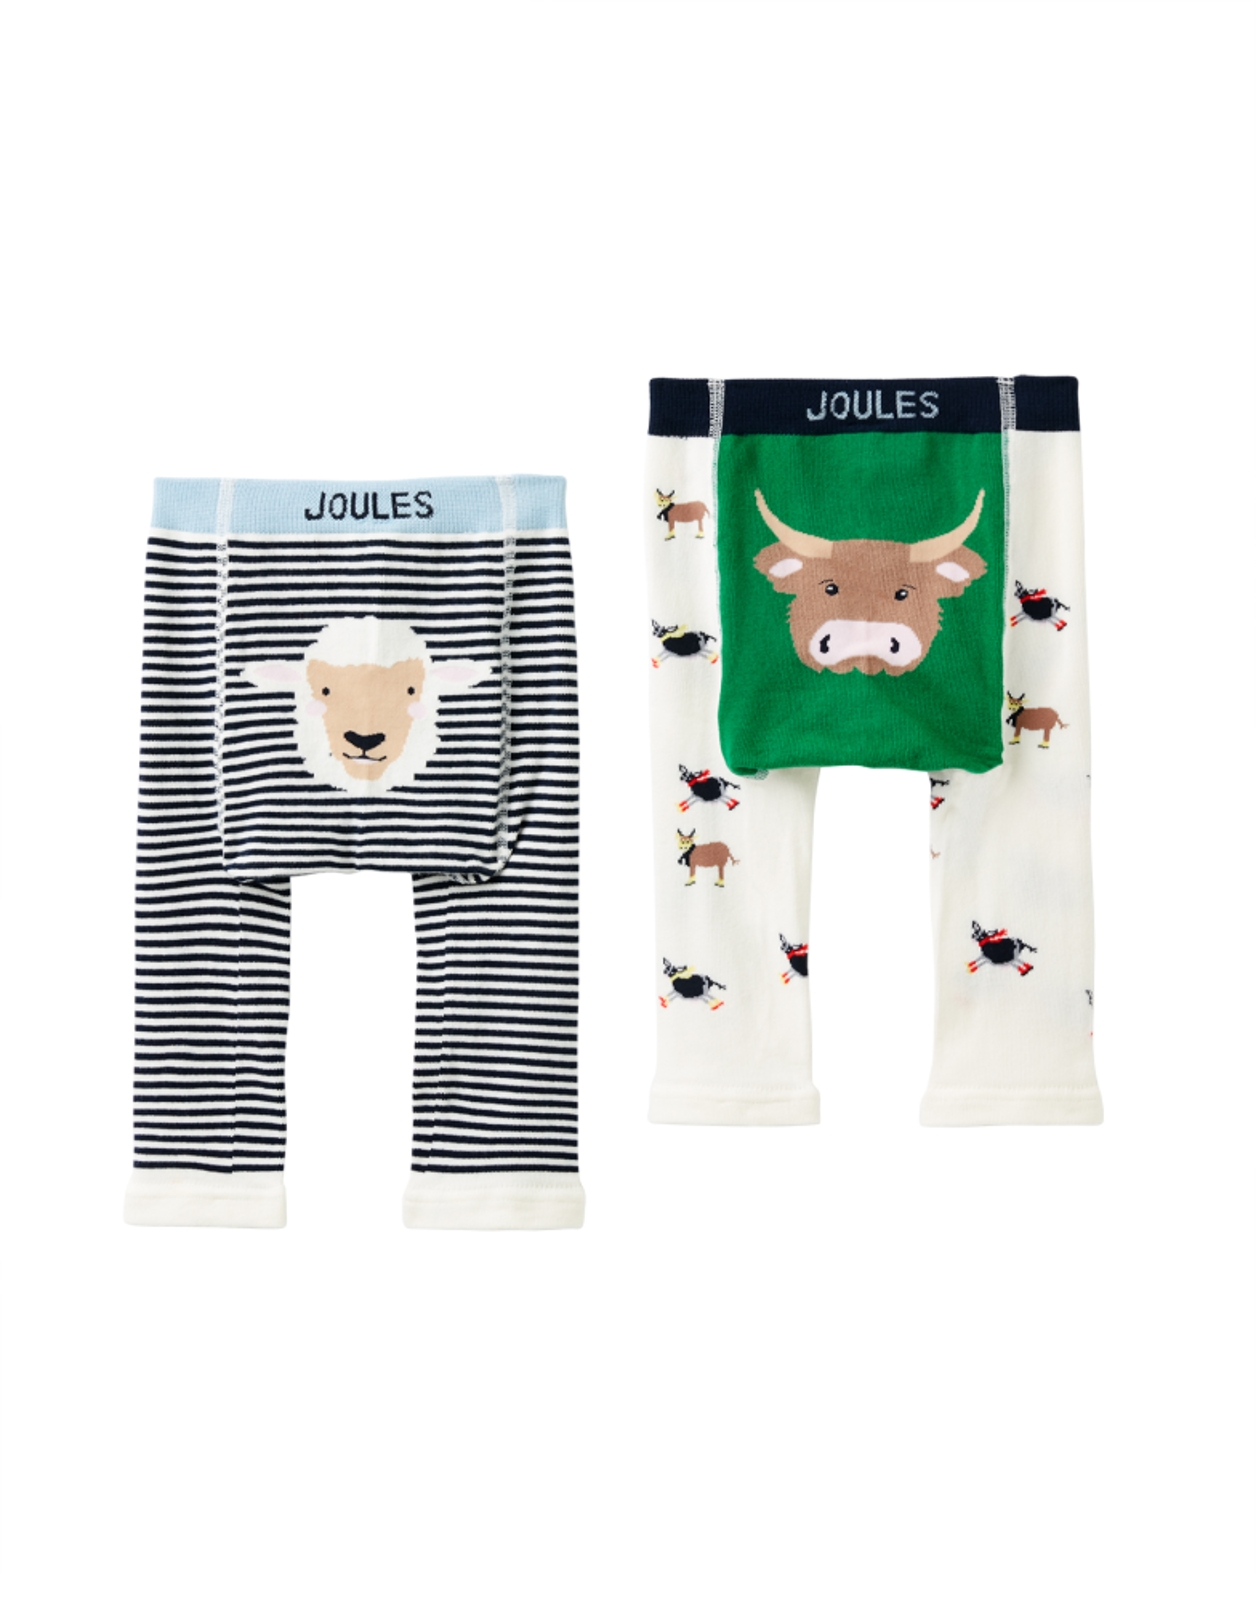 Joules LIVELY LEGGINGS Boys 2 Pair Character Knit Leggings- Multi Cow  Sheep: 6-12 months - Hopskotch - Gifts and Childrens Wear